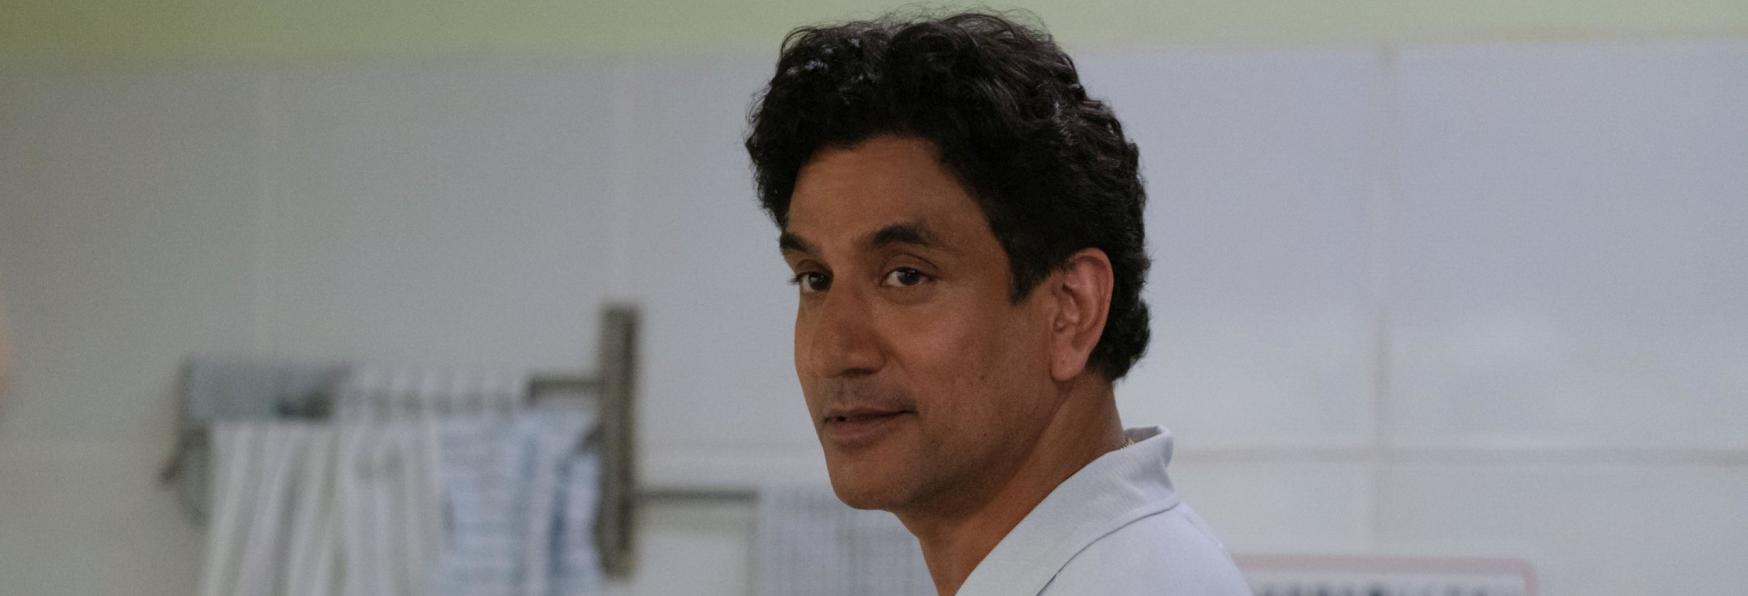 The Cleaning Lady 2: Naveen Andrews nel Cast della Nuova Stagione